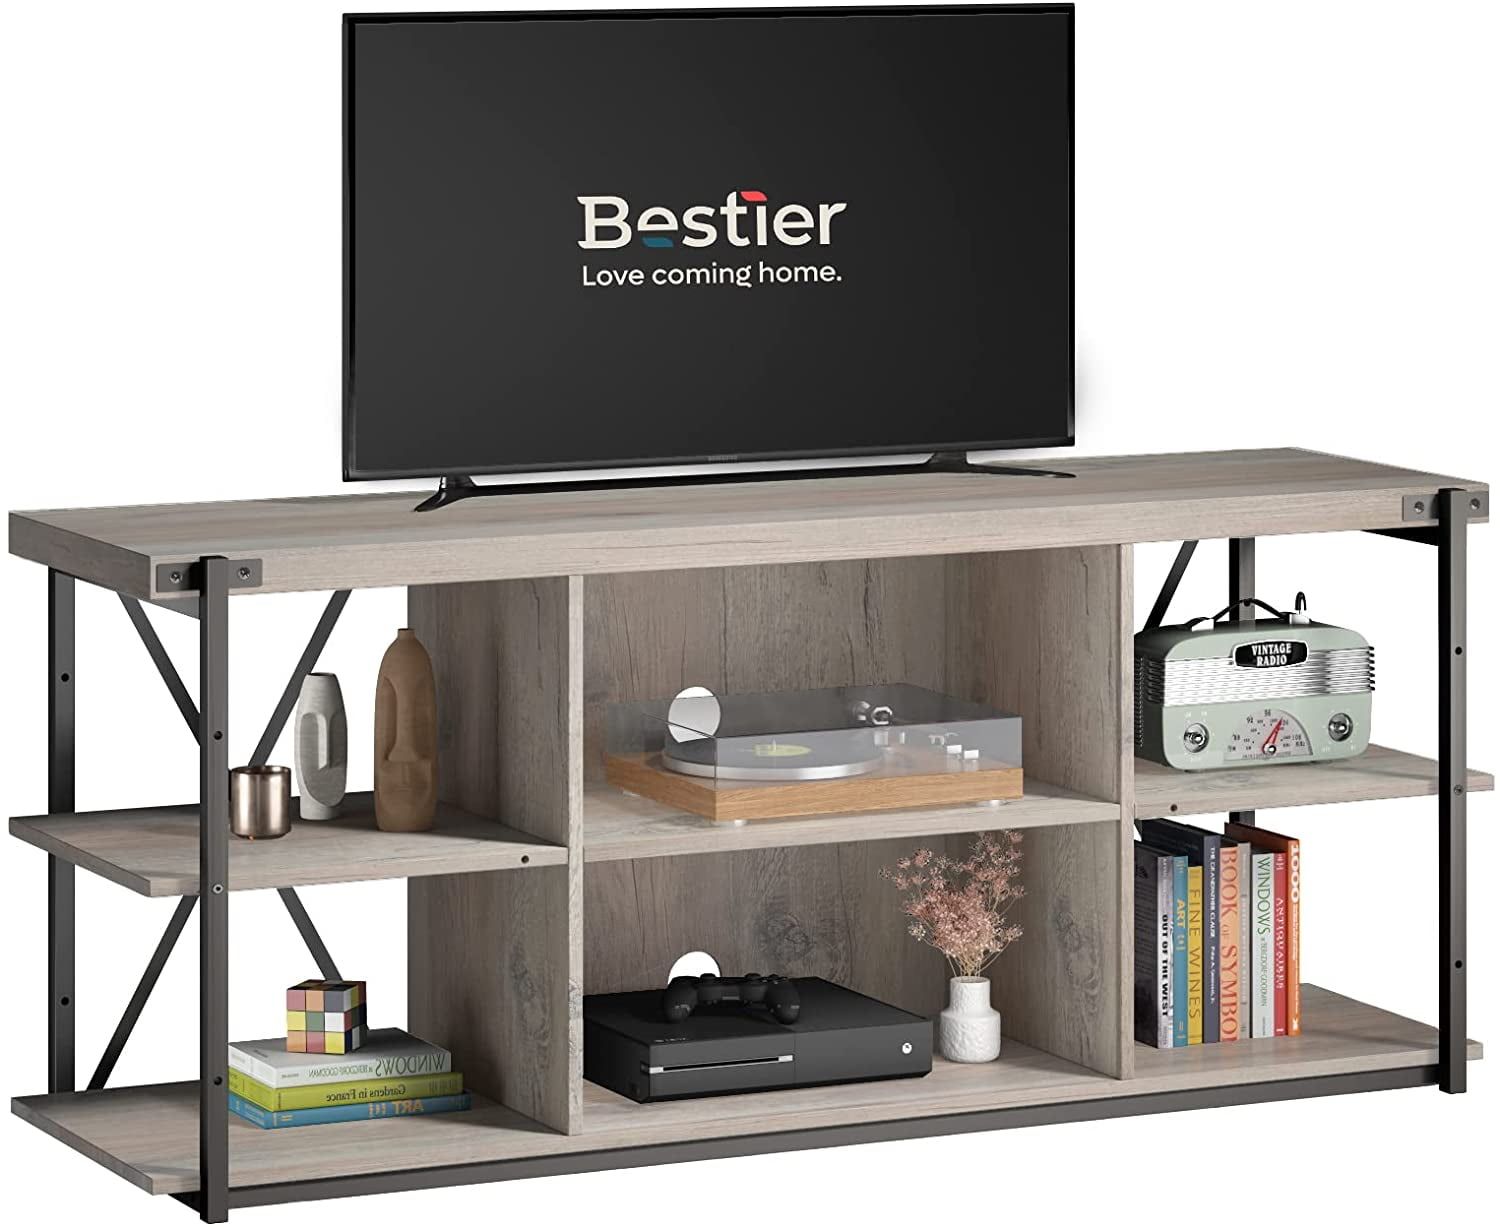 Bestier Farmhouse Tv Stand With Storage Shelves For Tvs Up To 65", Wash With Bestier Tv Stand For Tvs Up To 75" (Gallery 4 of 20)